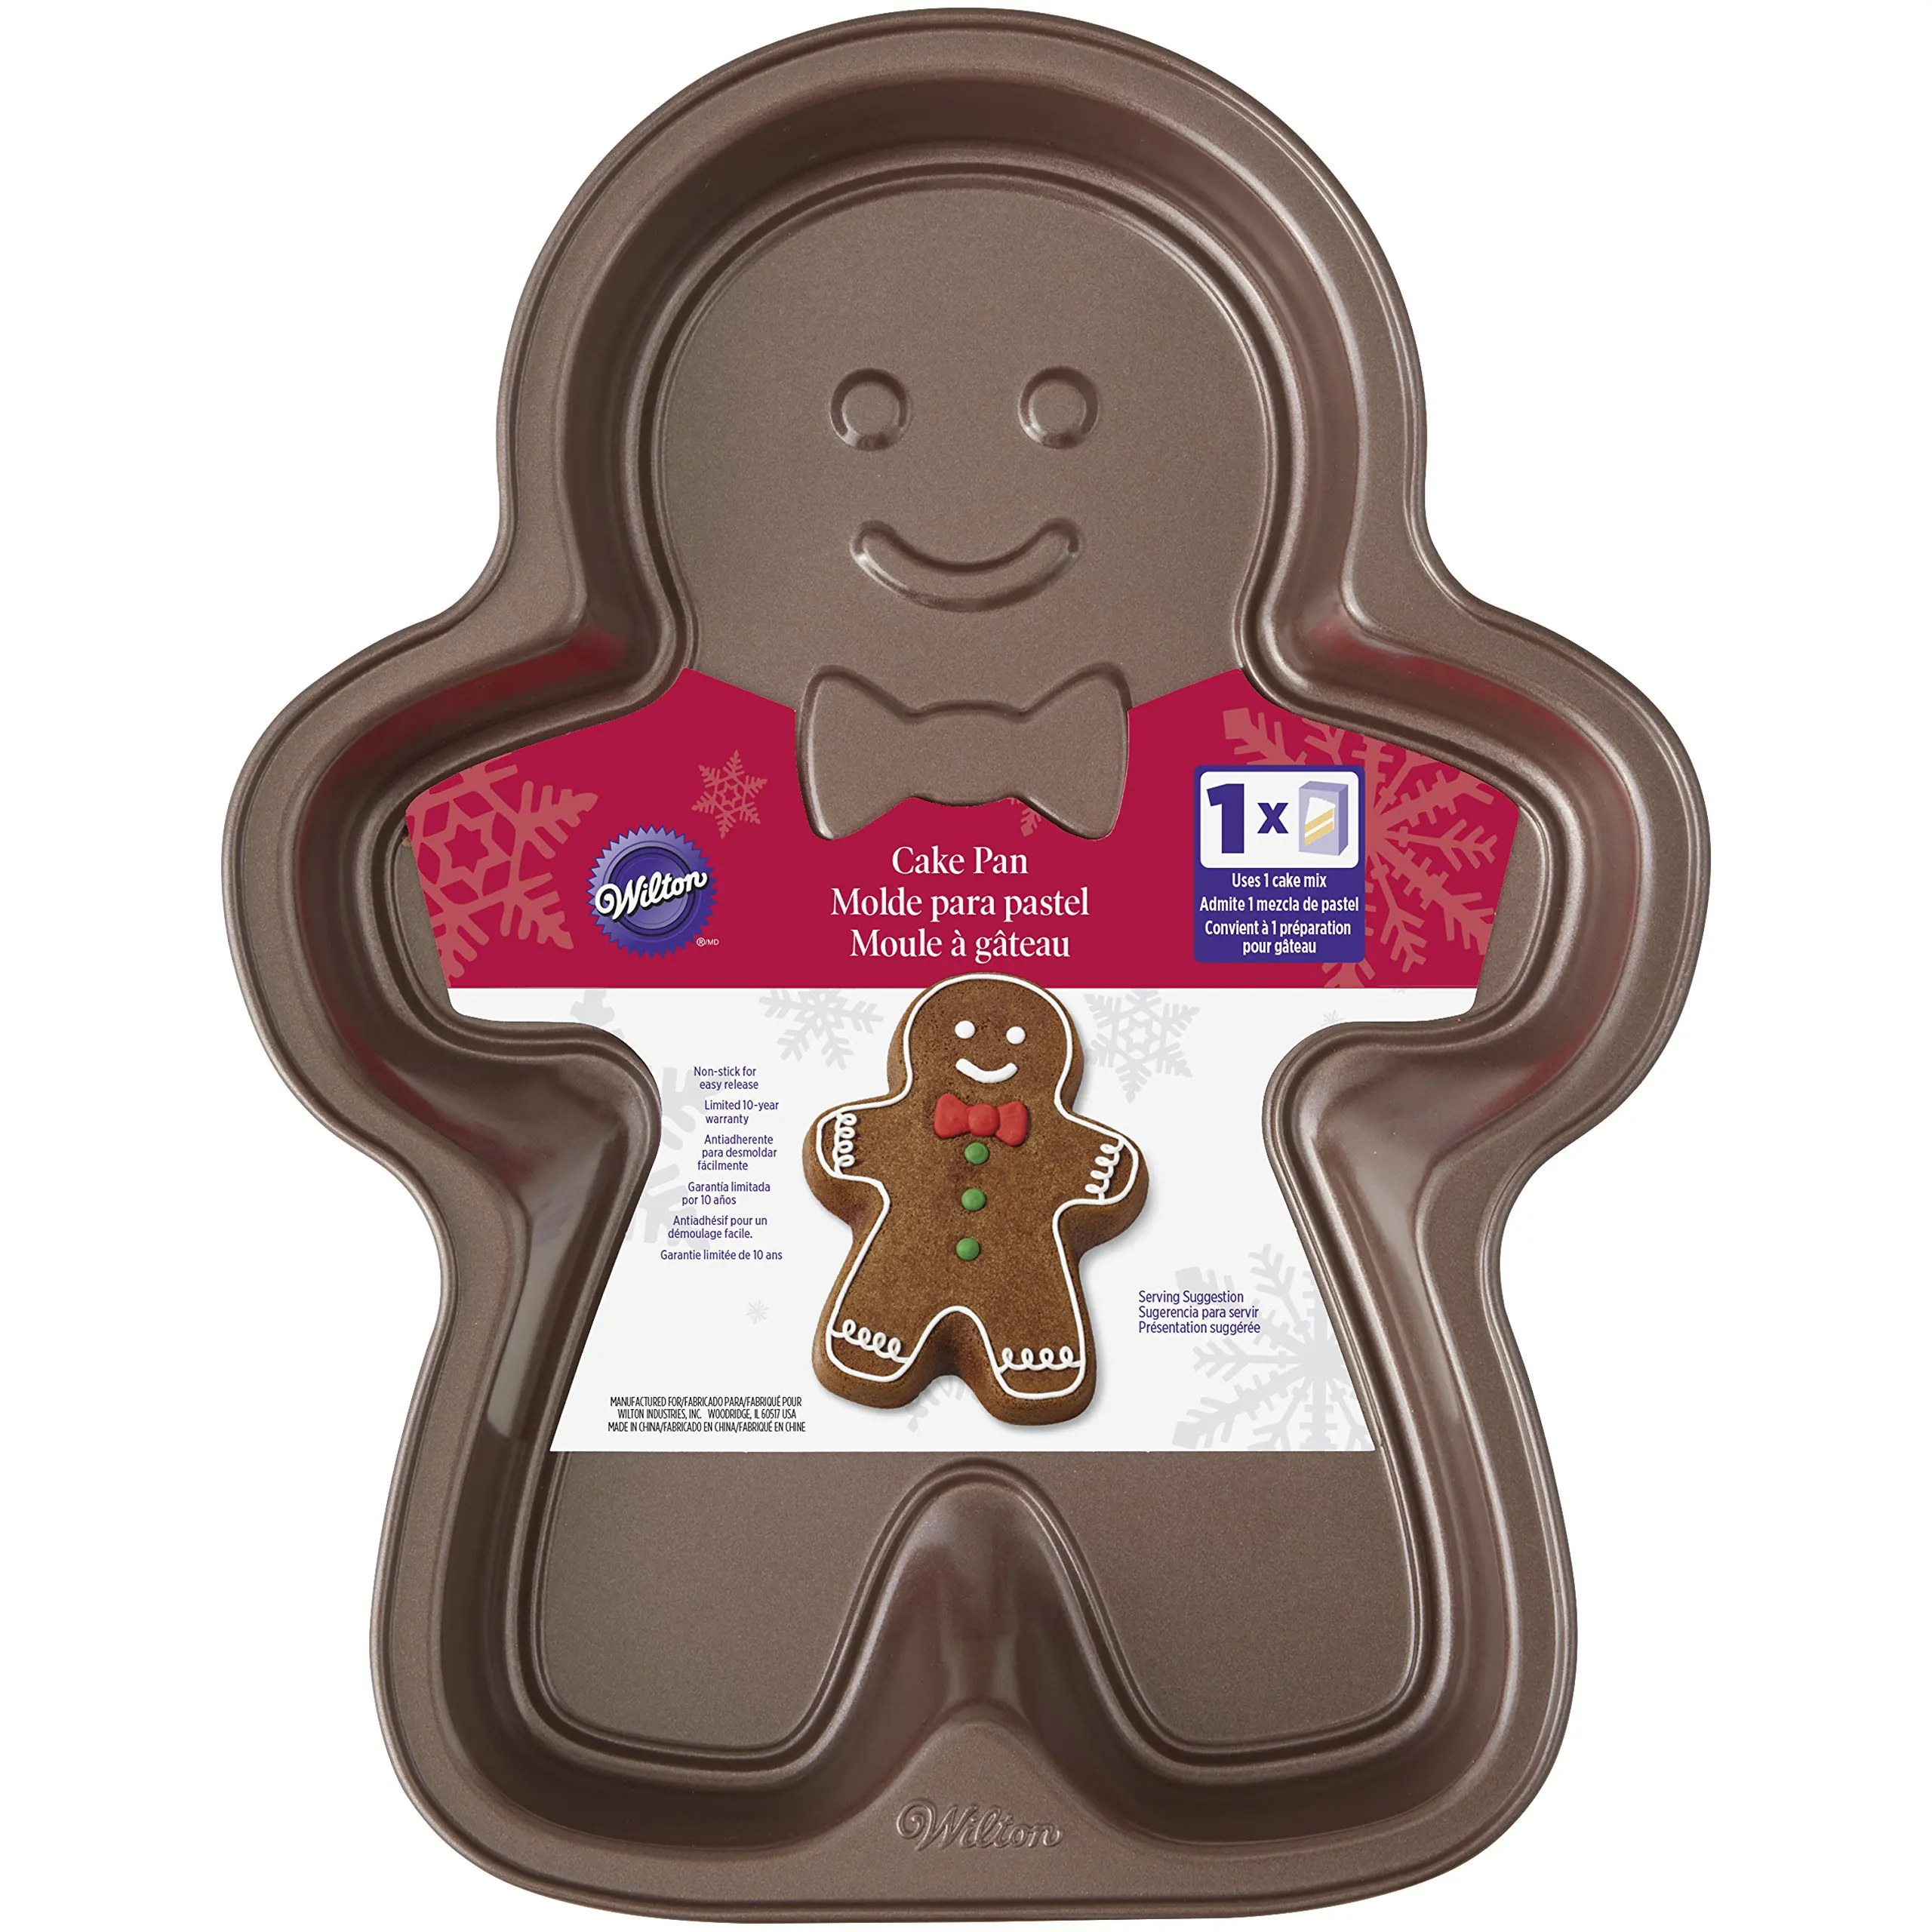 Cheap Gingerbread Cake Pan Find Gingerbread Cake Pan Deals On Line At Alibaba Com